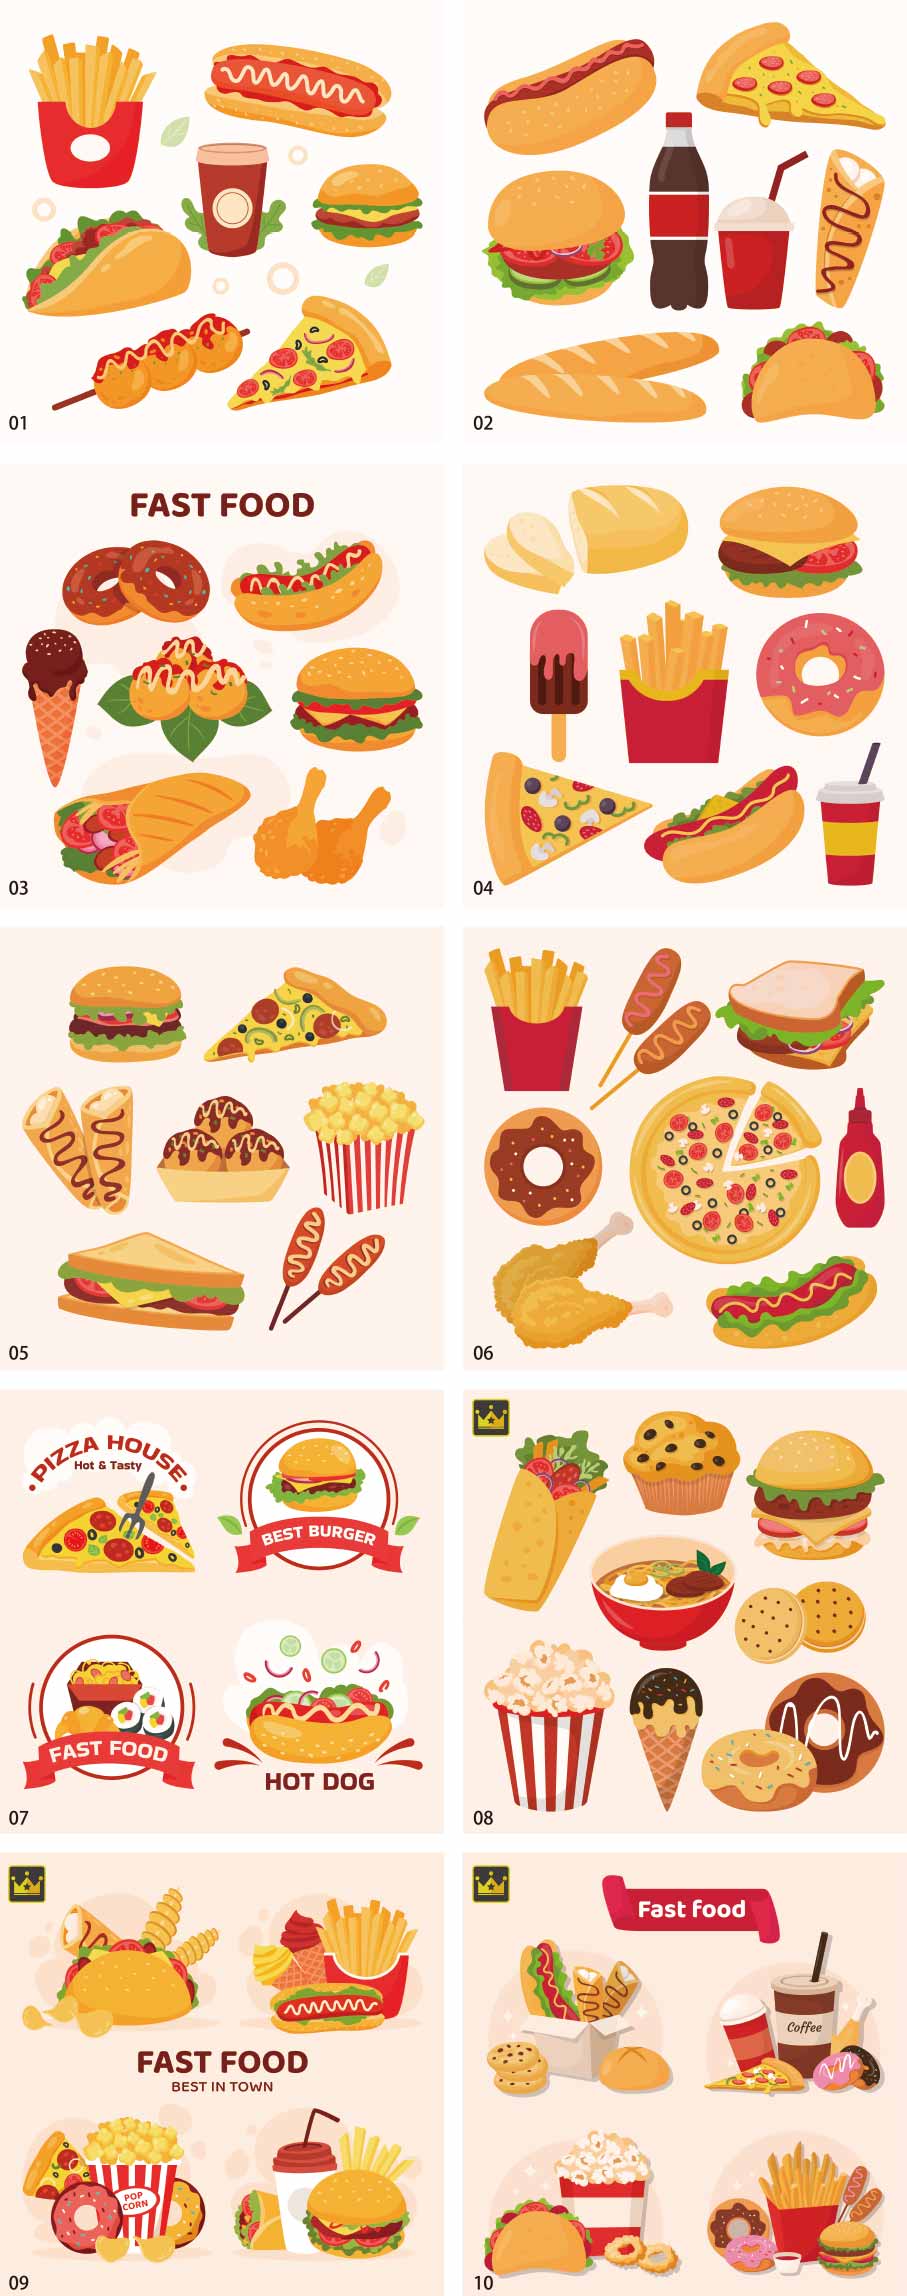 Fast food illustration collection vol.2